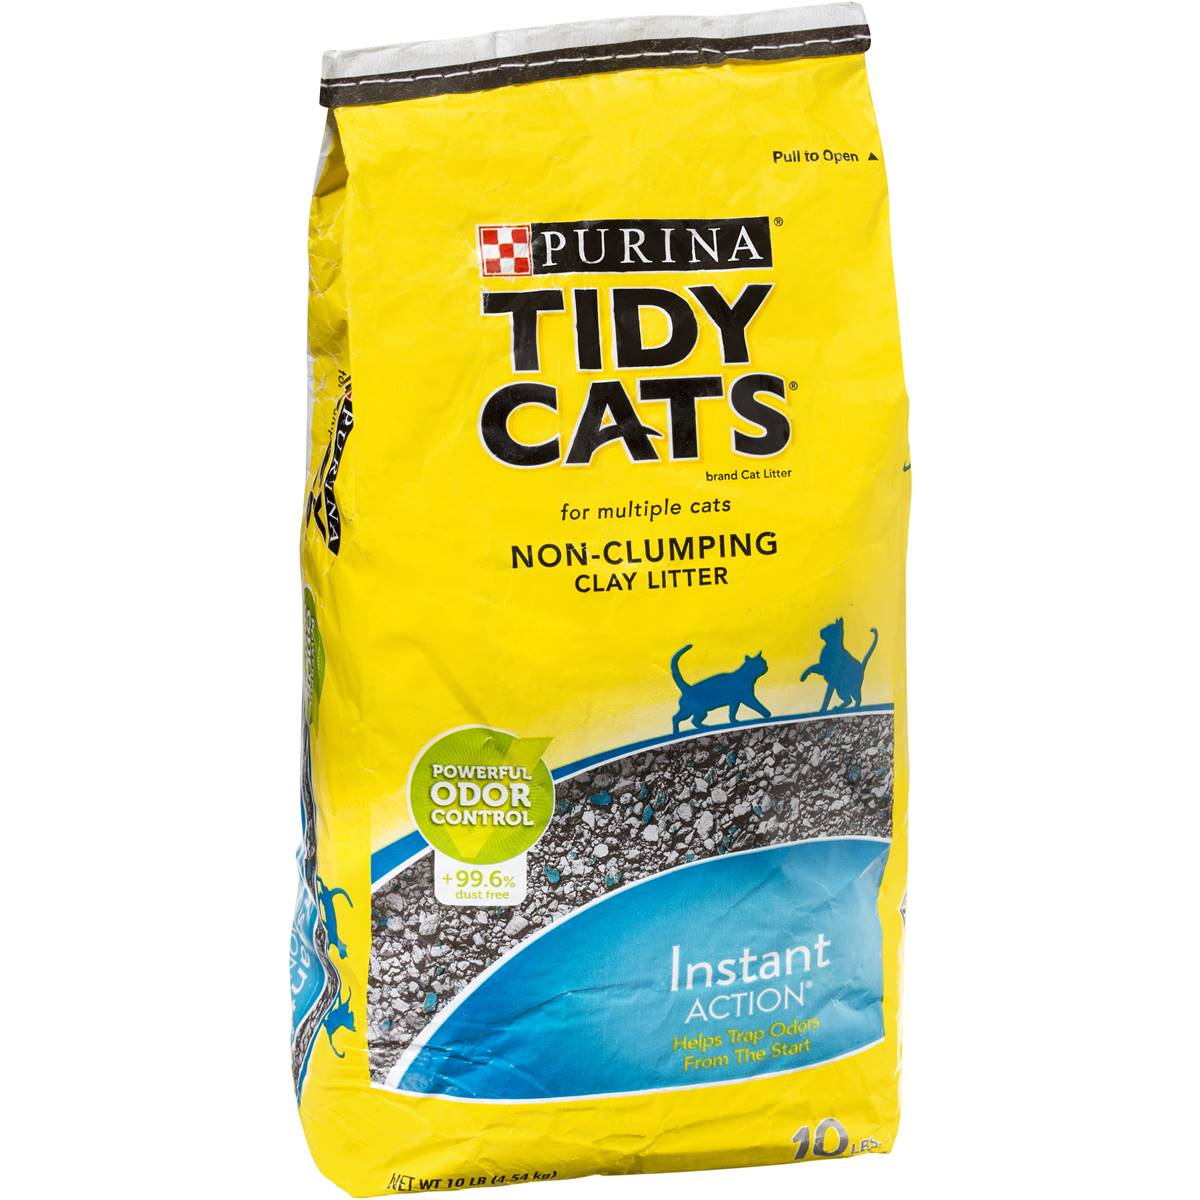 Purina Tidy Cats Instant Action Nonclumping Clay Litter 4.54kg